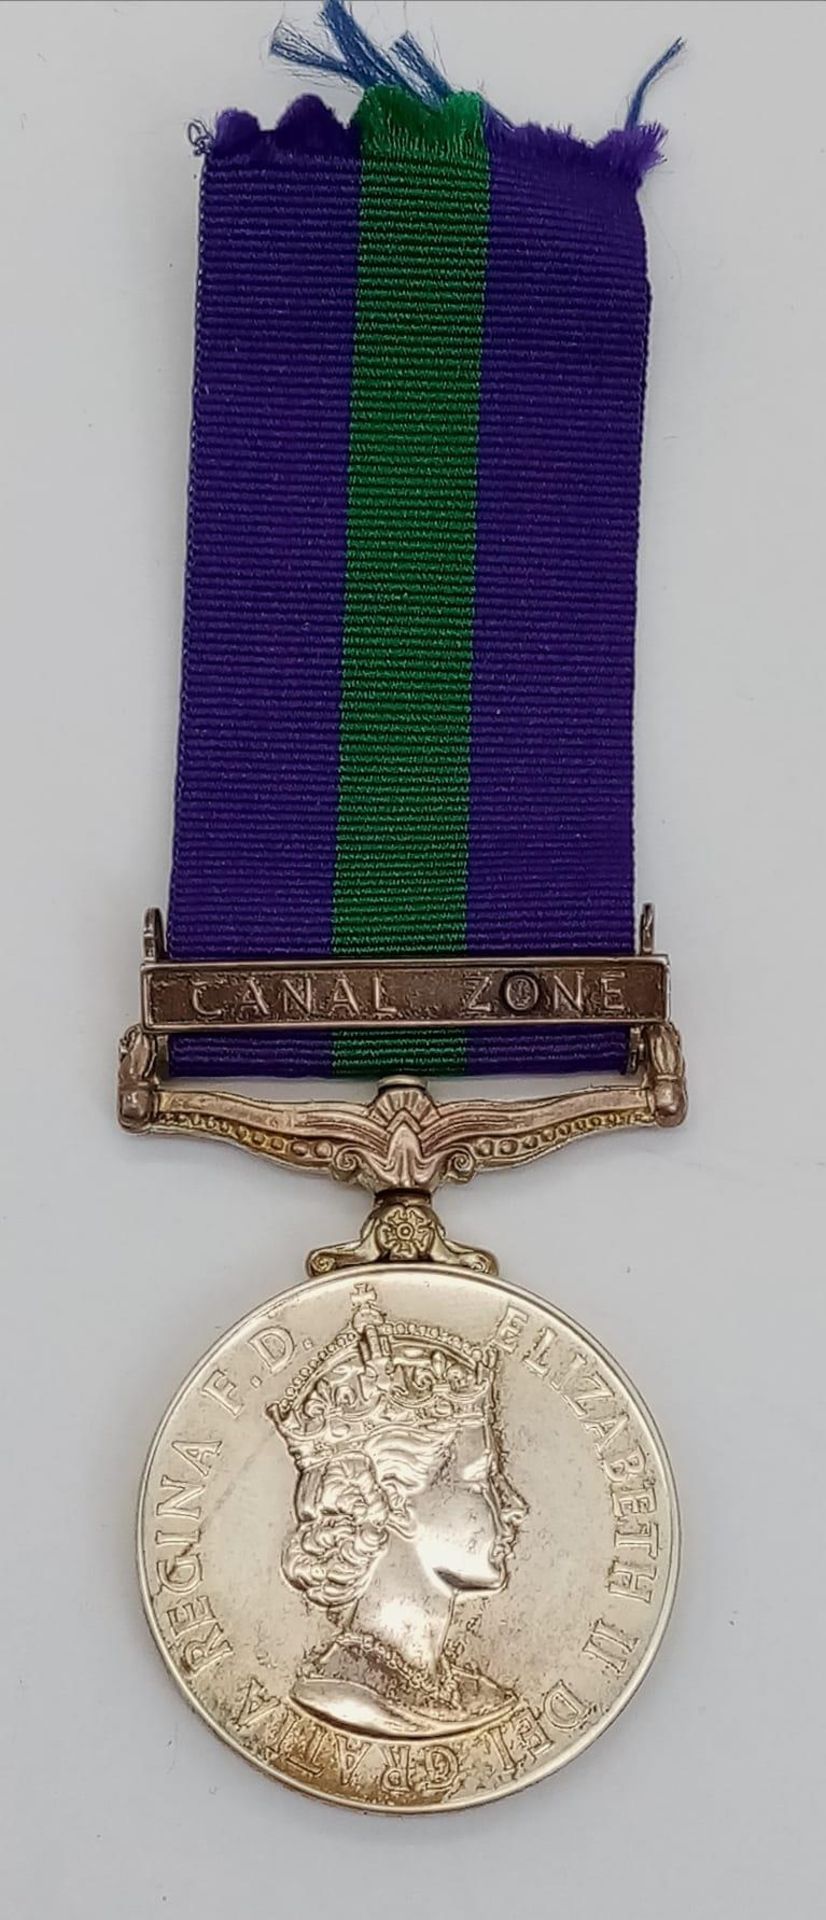 1918-1962 British General Service Medal with Canal Zone Bar. Awarded to: ACI A. Worsfold 2516441 R.